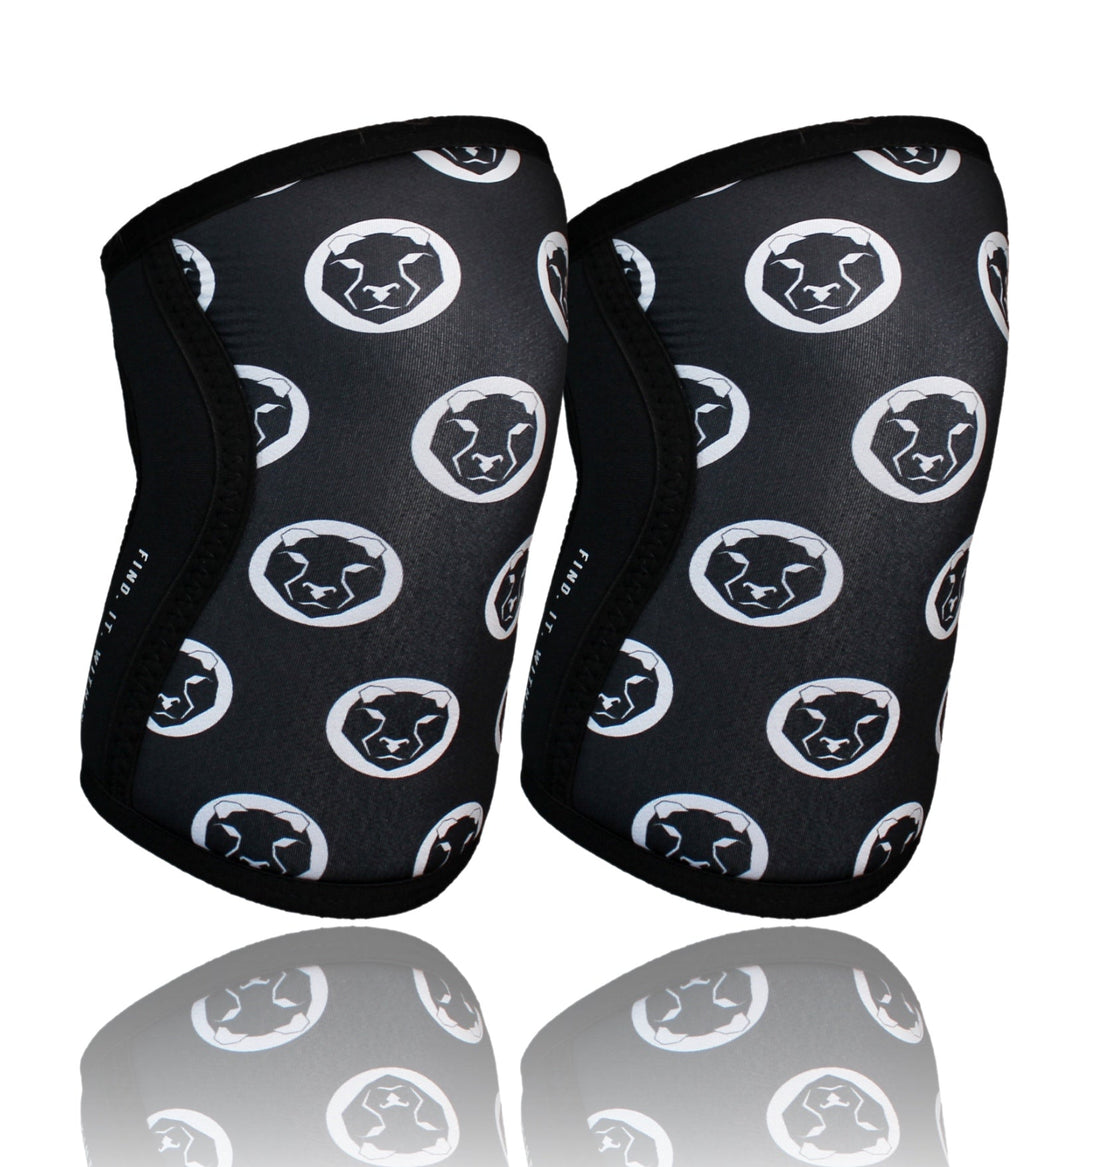 Exclusive Mammal Print V2 Knee Sleeves - 7mm Neoprene for elite knee support in limited edition design